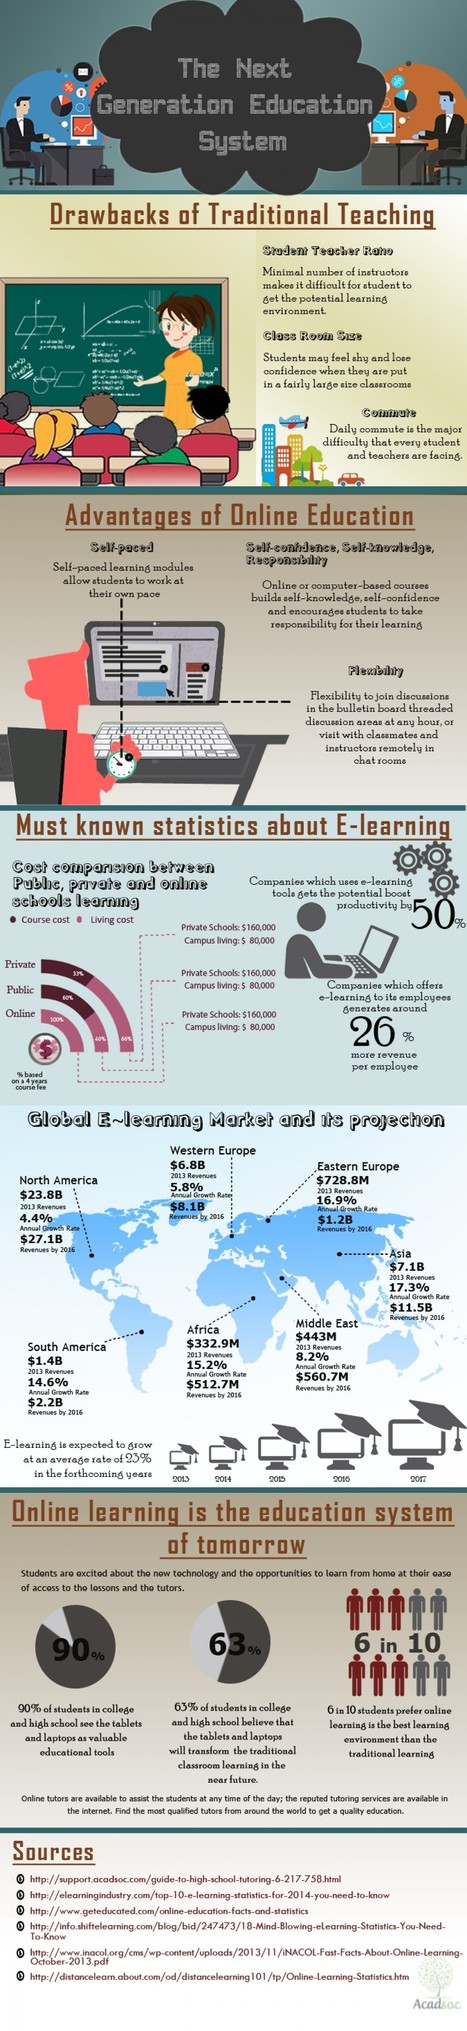 The next generation of education system [Infographic] | 21st Century Learning and Teaching | Scoop.it